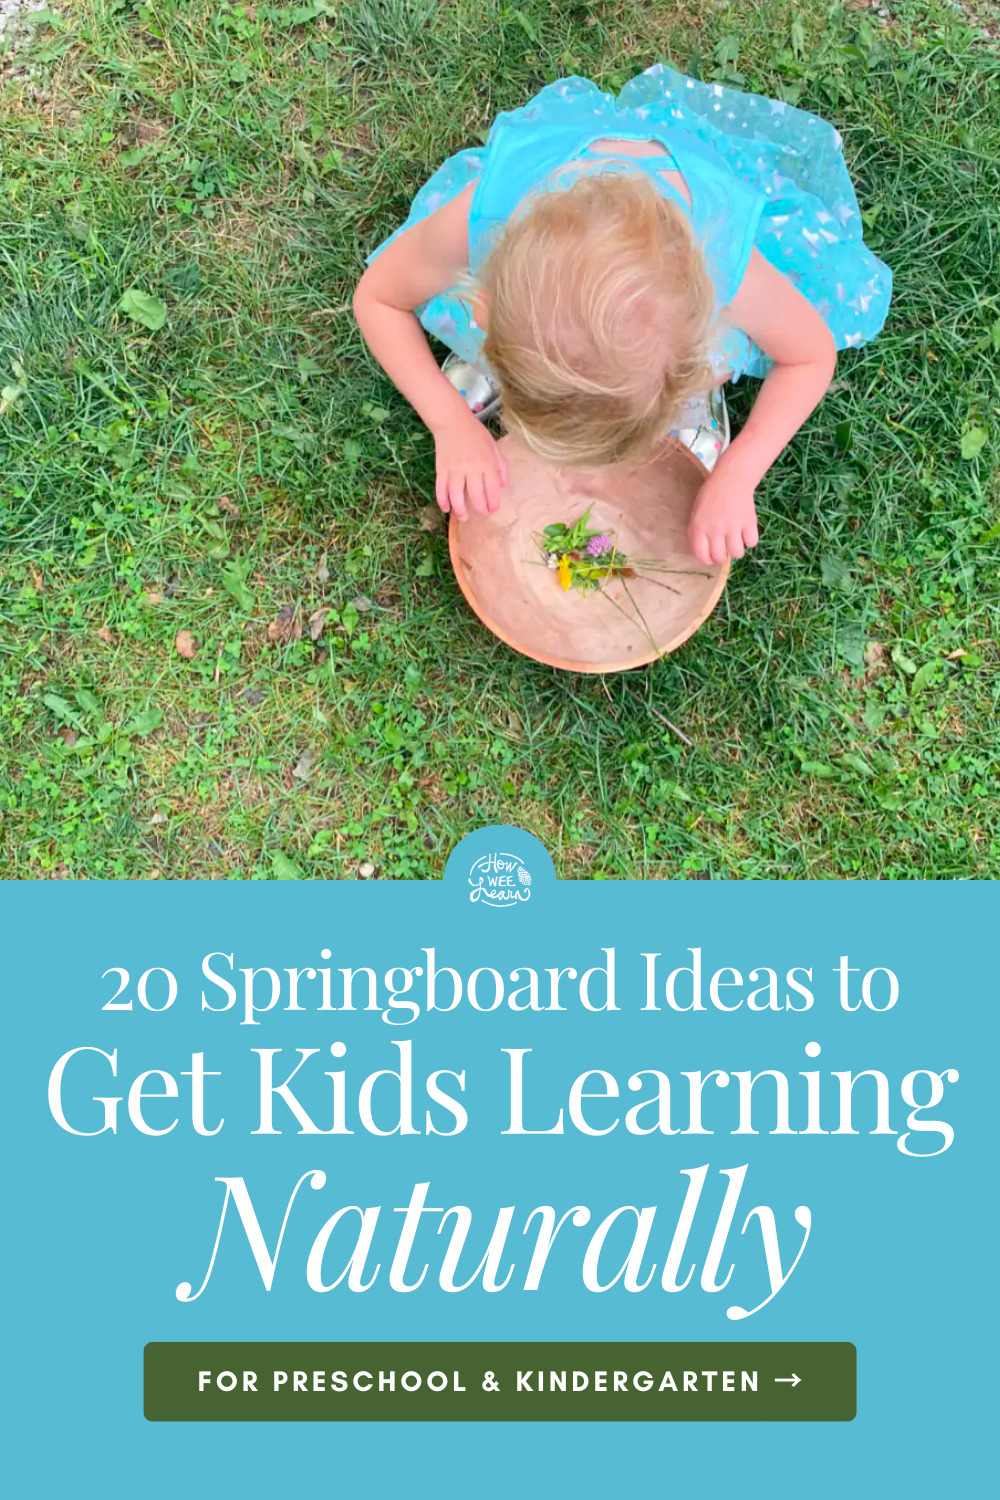 20 Springboard Ideas to Get Kids Learning Naturally for Preschool and Kindergarten